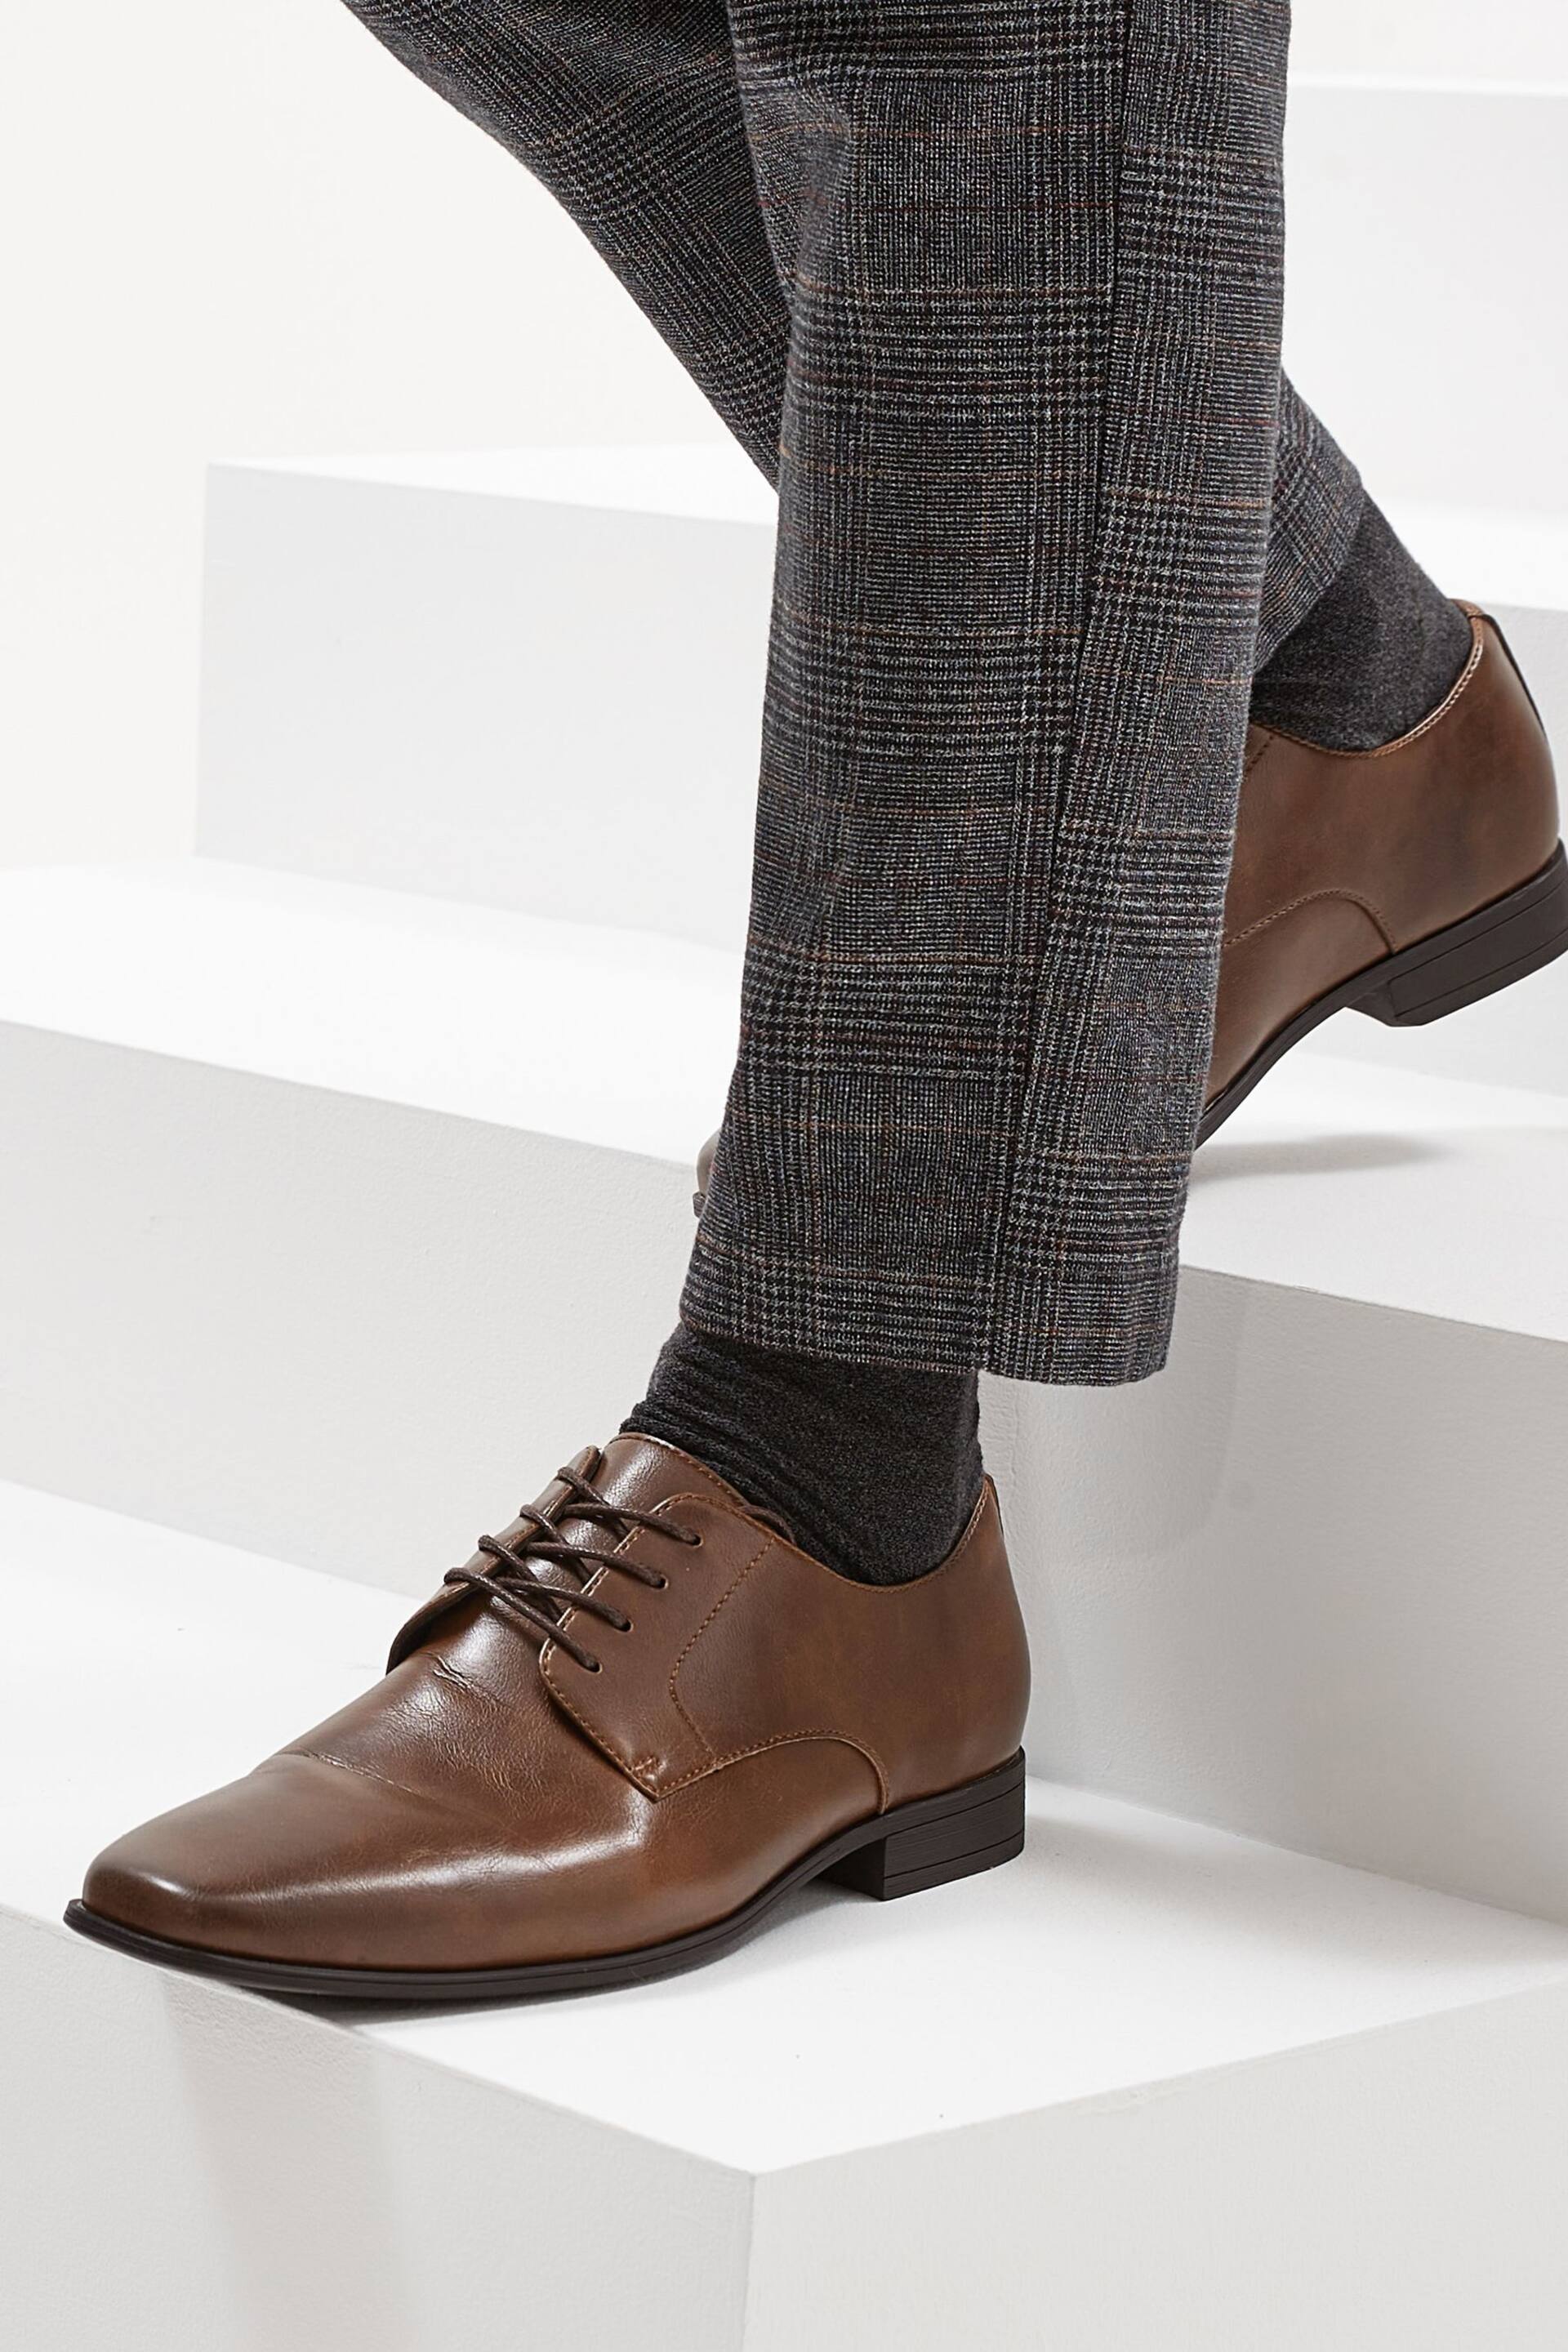 Tan Brown Slim Square Derby Shoes - Image 10 of 10